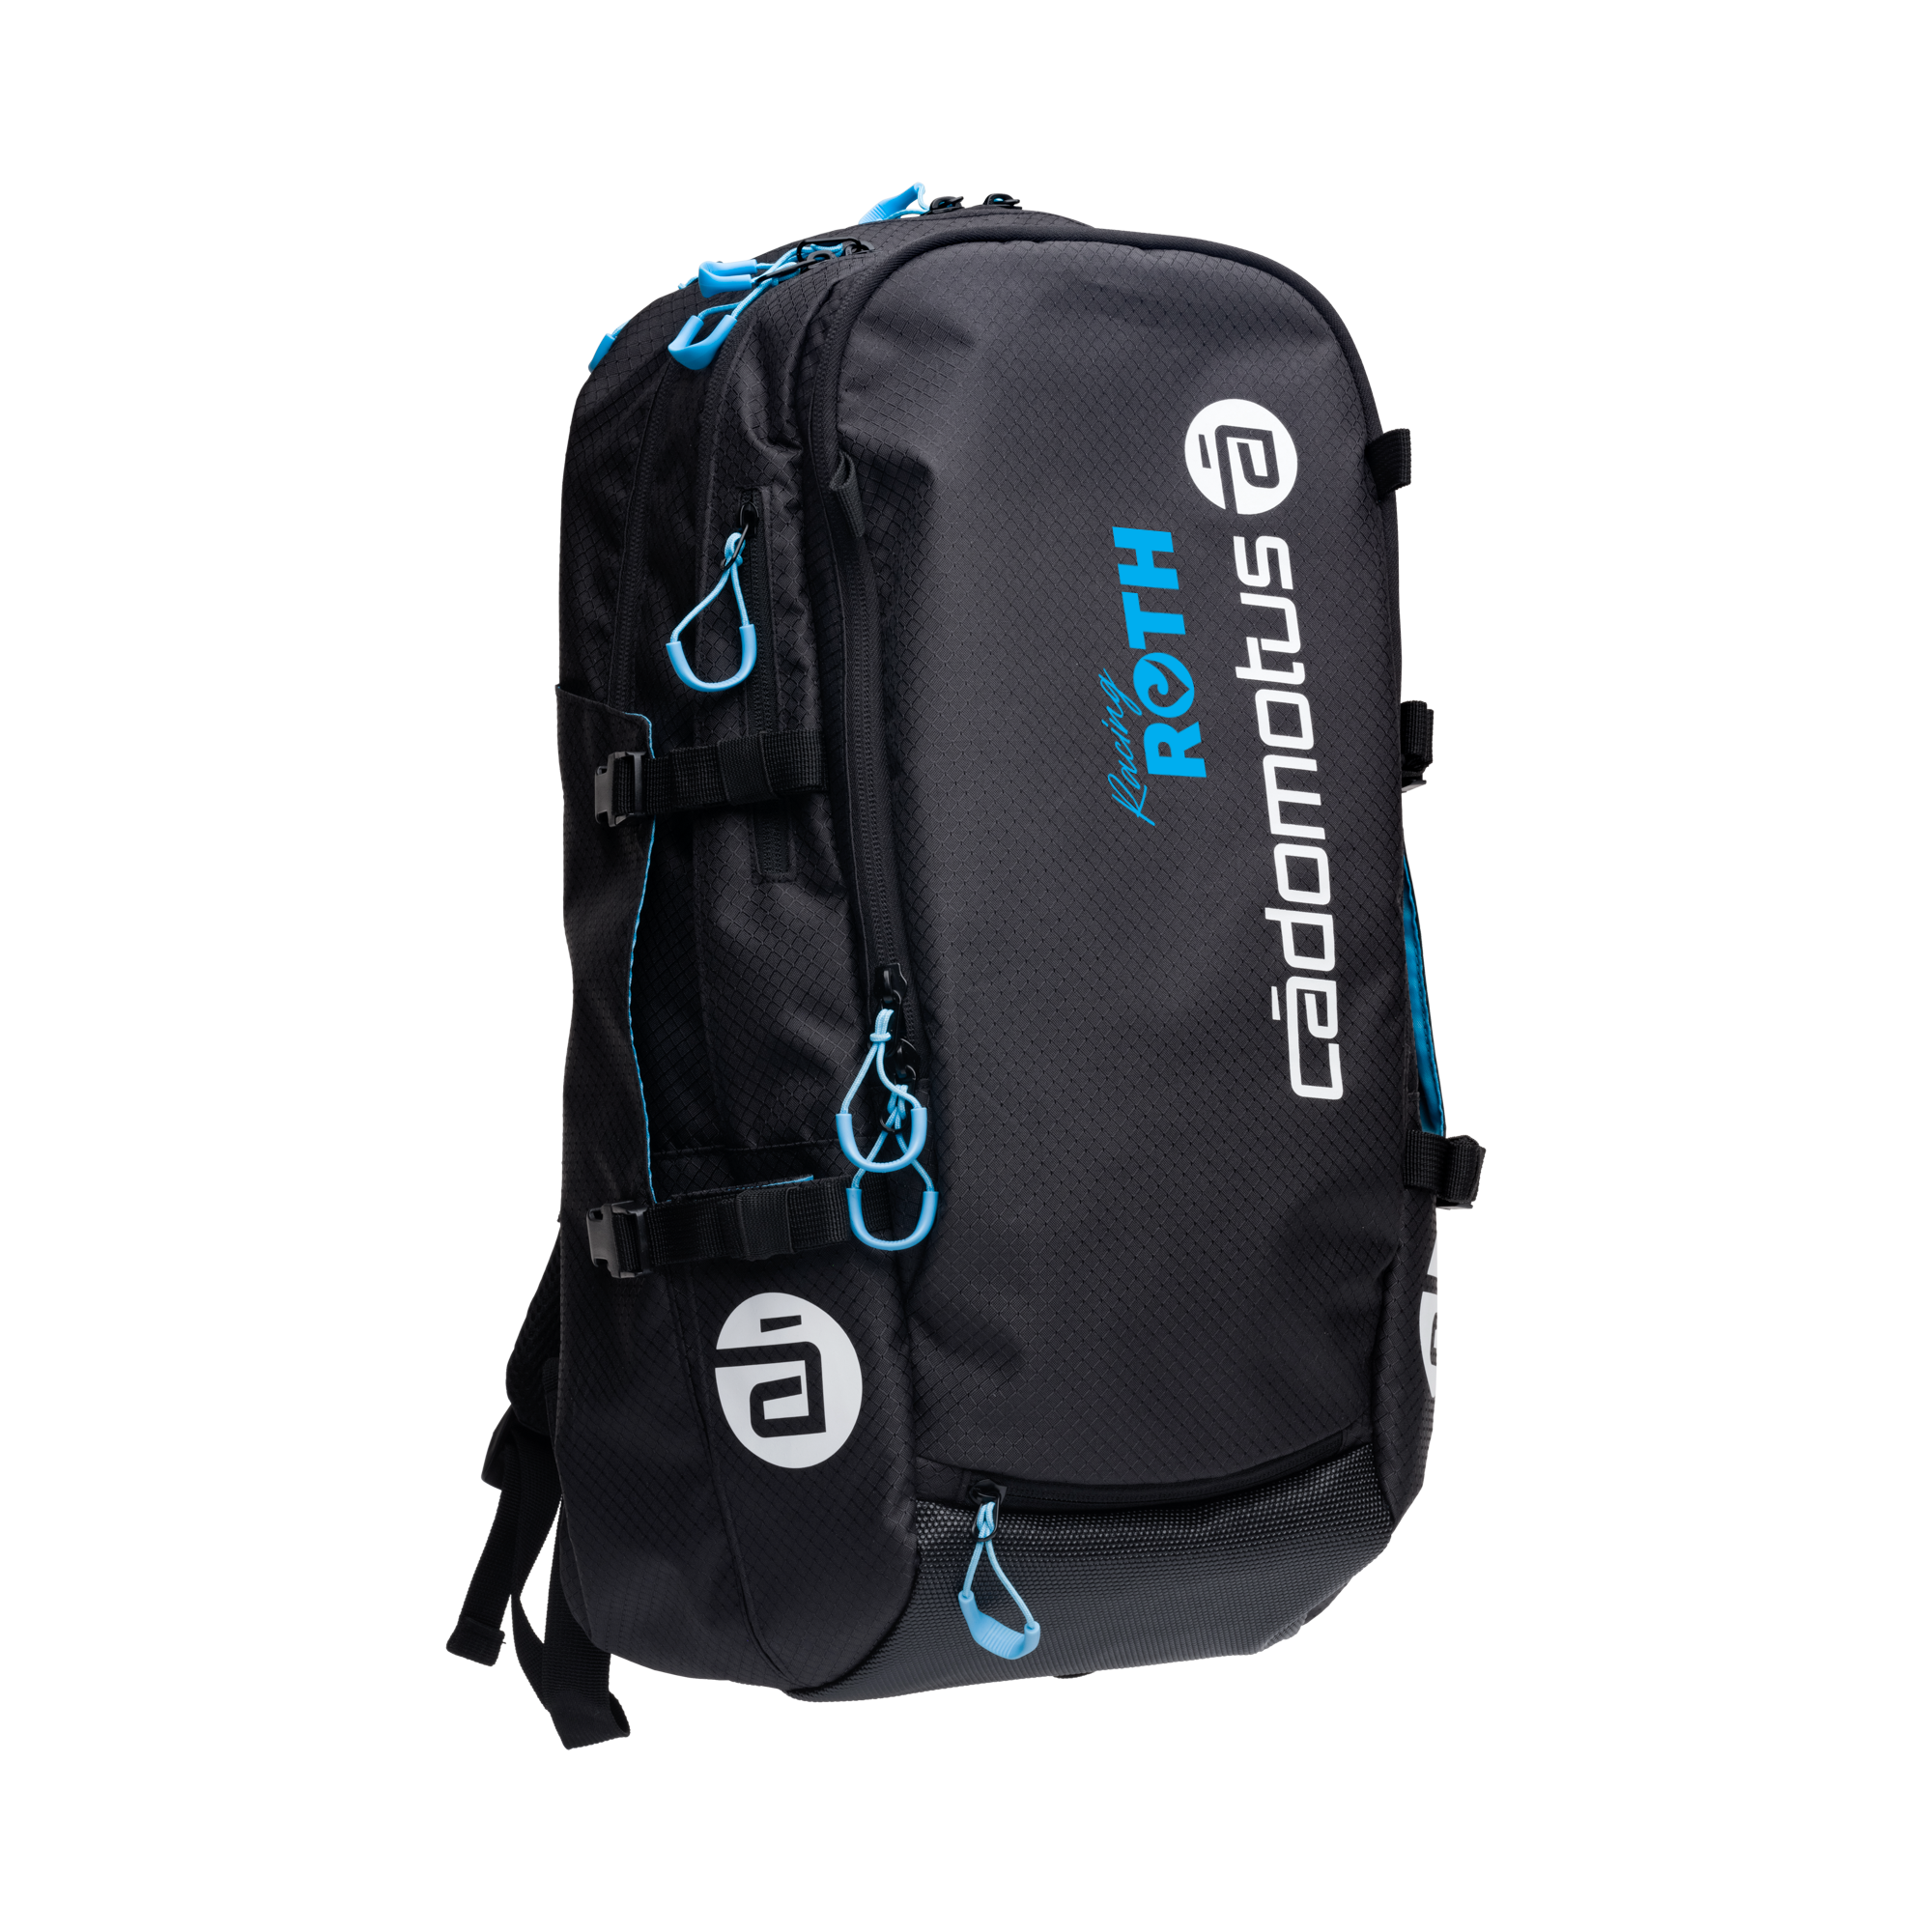 Airflow 2.0 Every Day Training Backpack XL - Racing Roth Edition